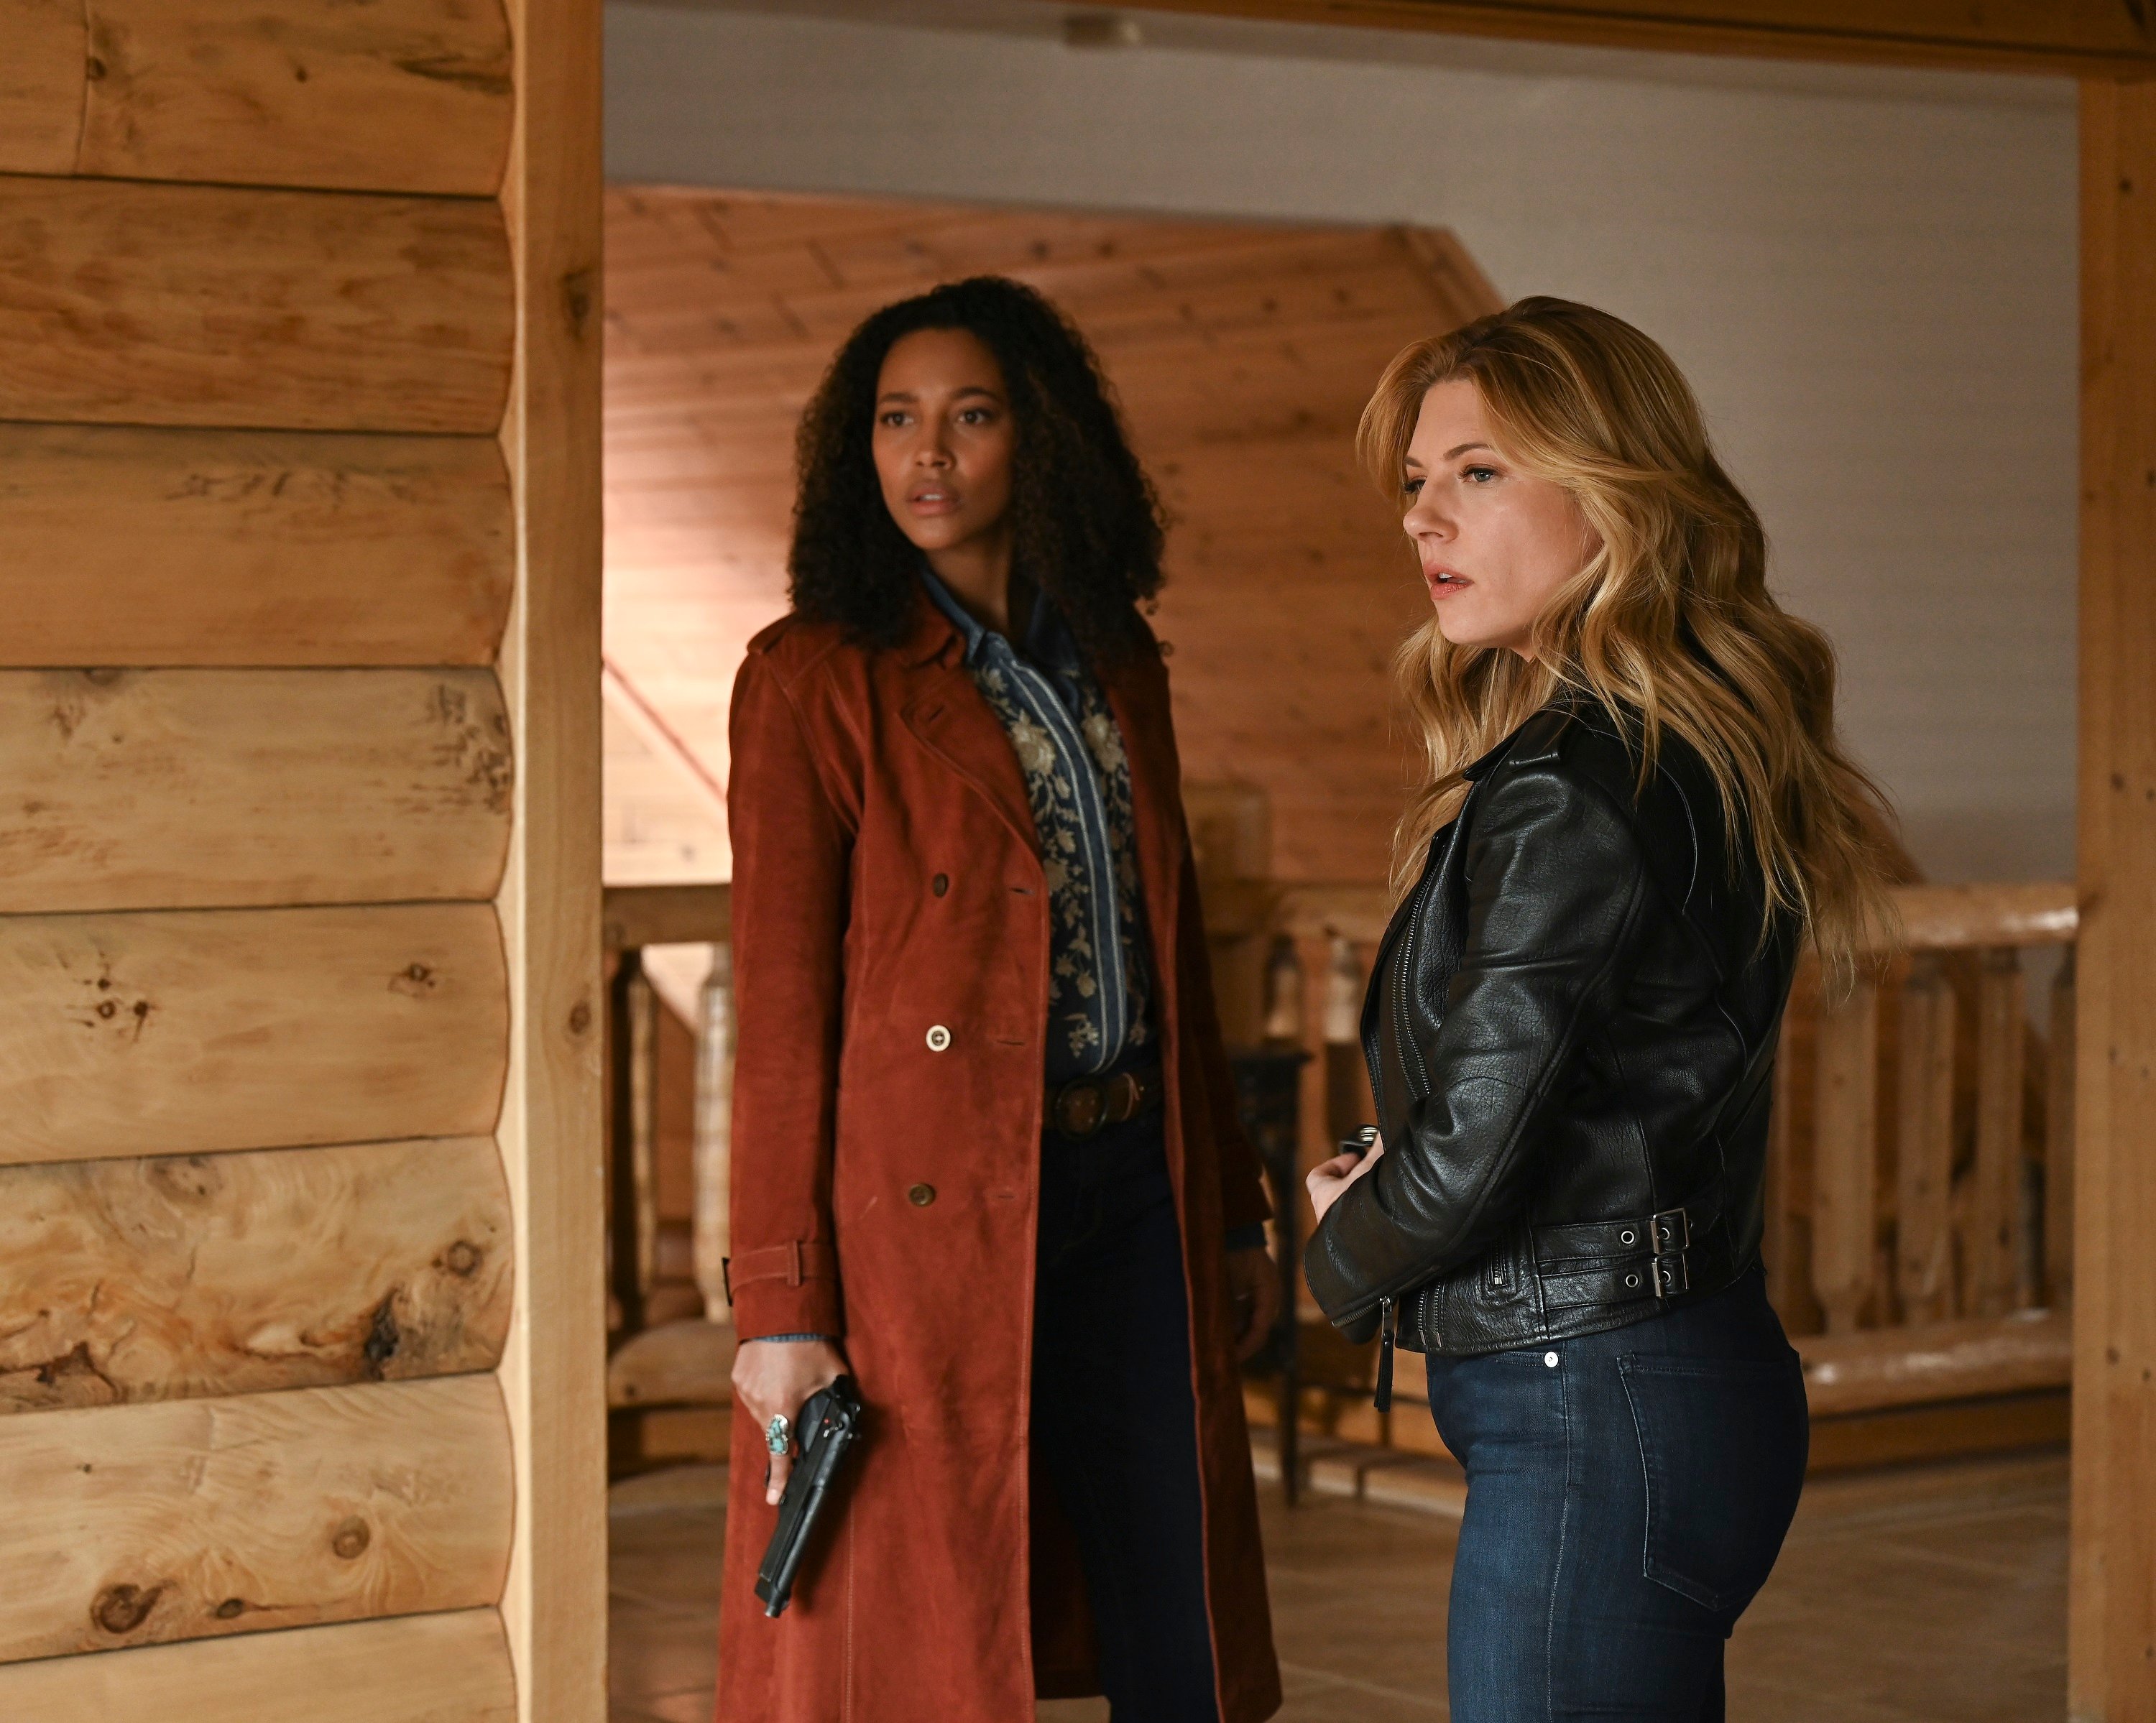 'Big Sky' cast Kylie Bunbury as Cassie and Katheryn Winnick as Jenny standing together with guns out